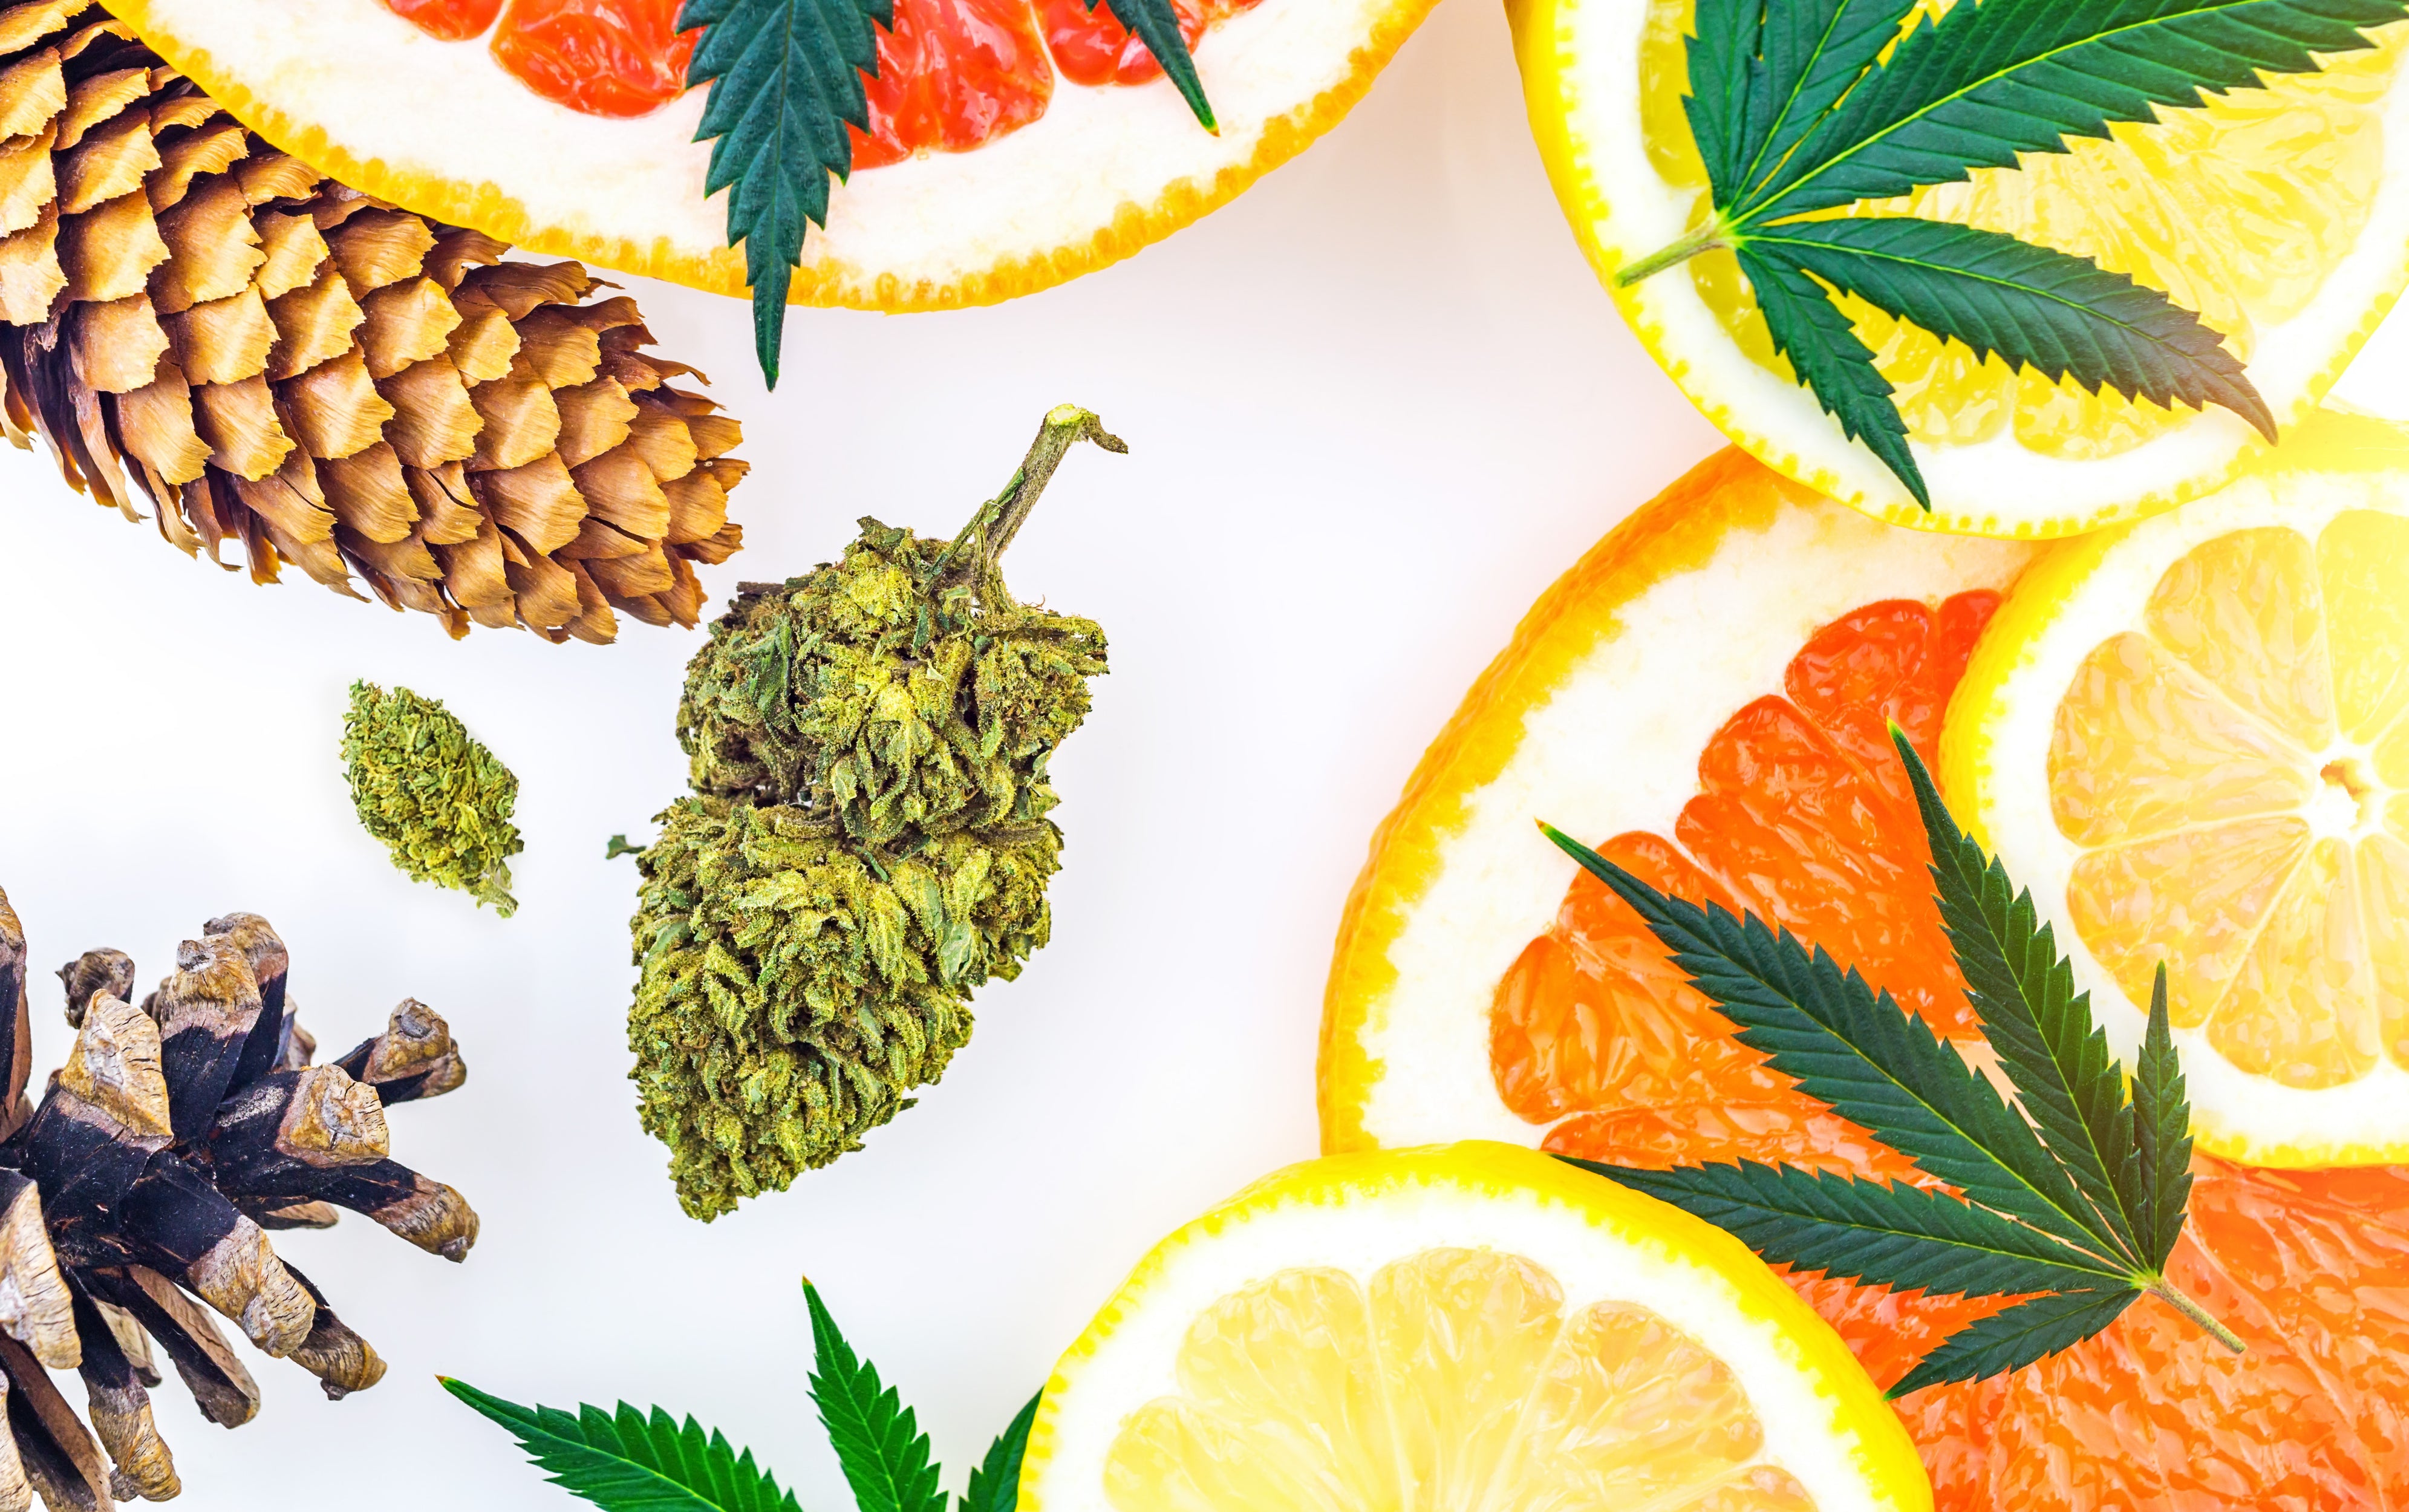 Cannabis flower nugs lie next to pine cones, grapefruit, and lemon slices with similar terpenes.